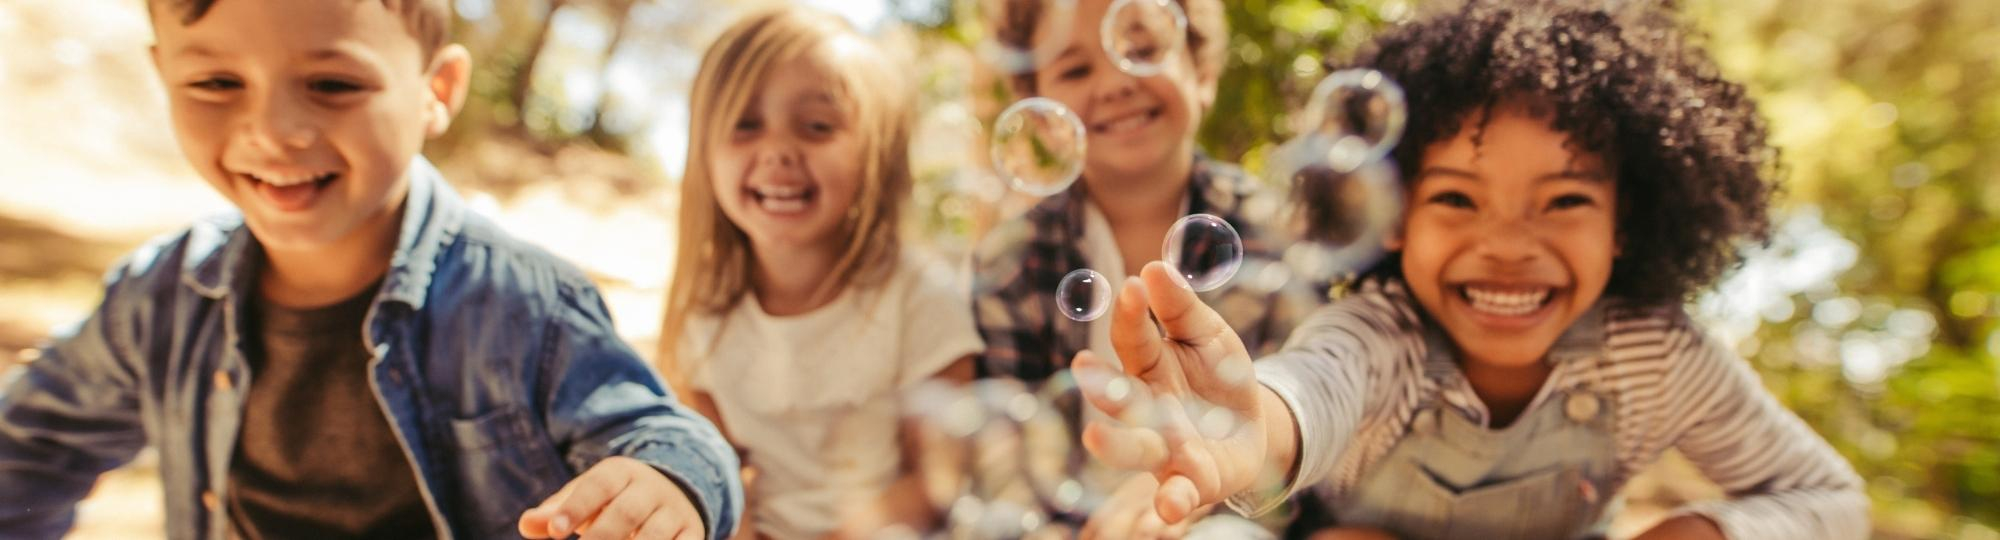 Group of kids playing with bubbles